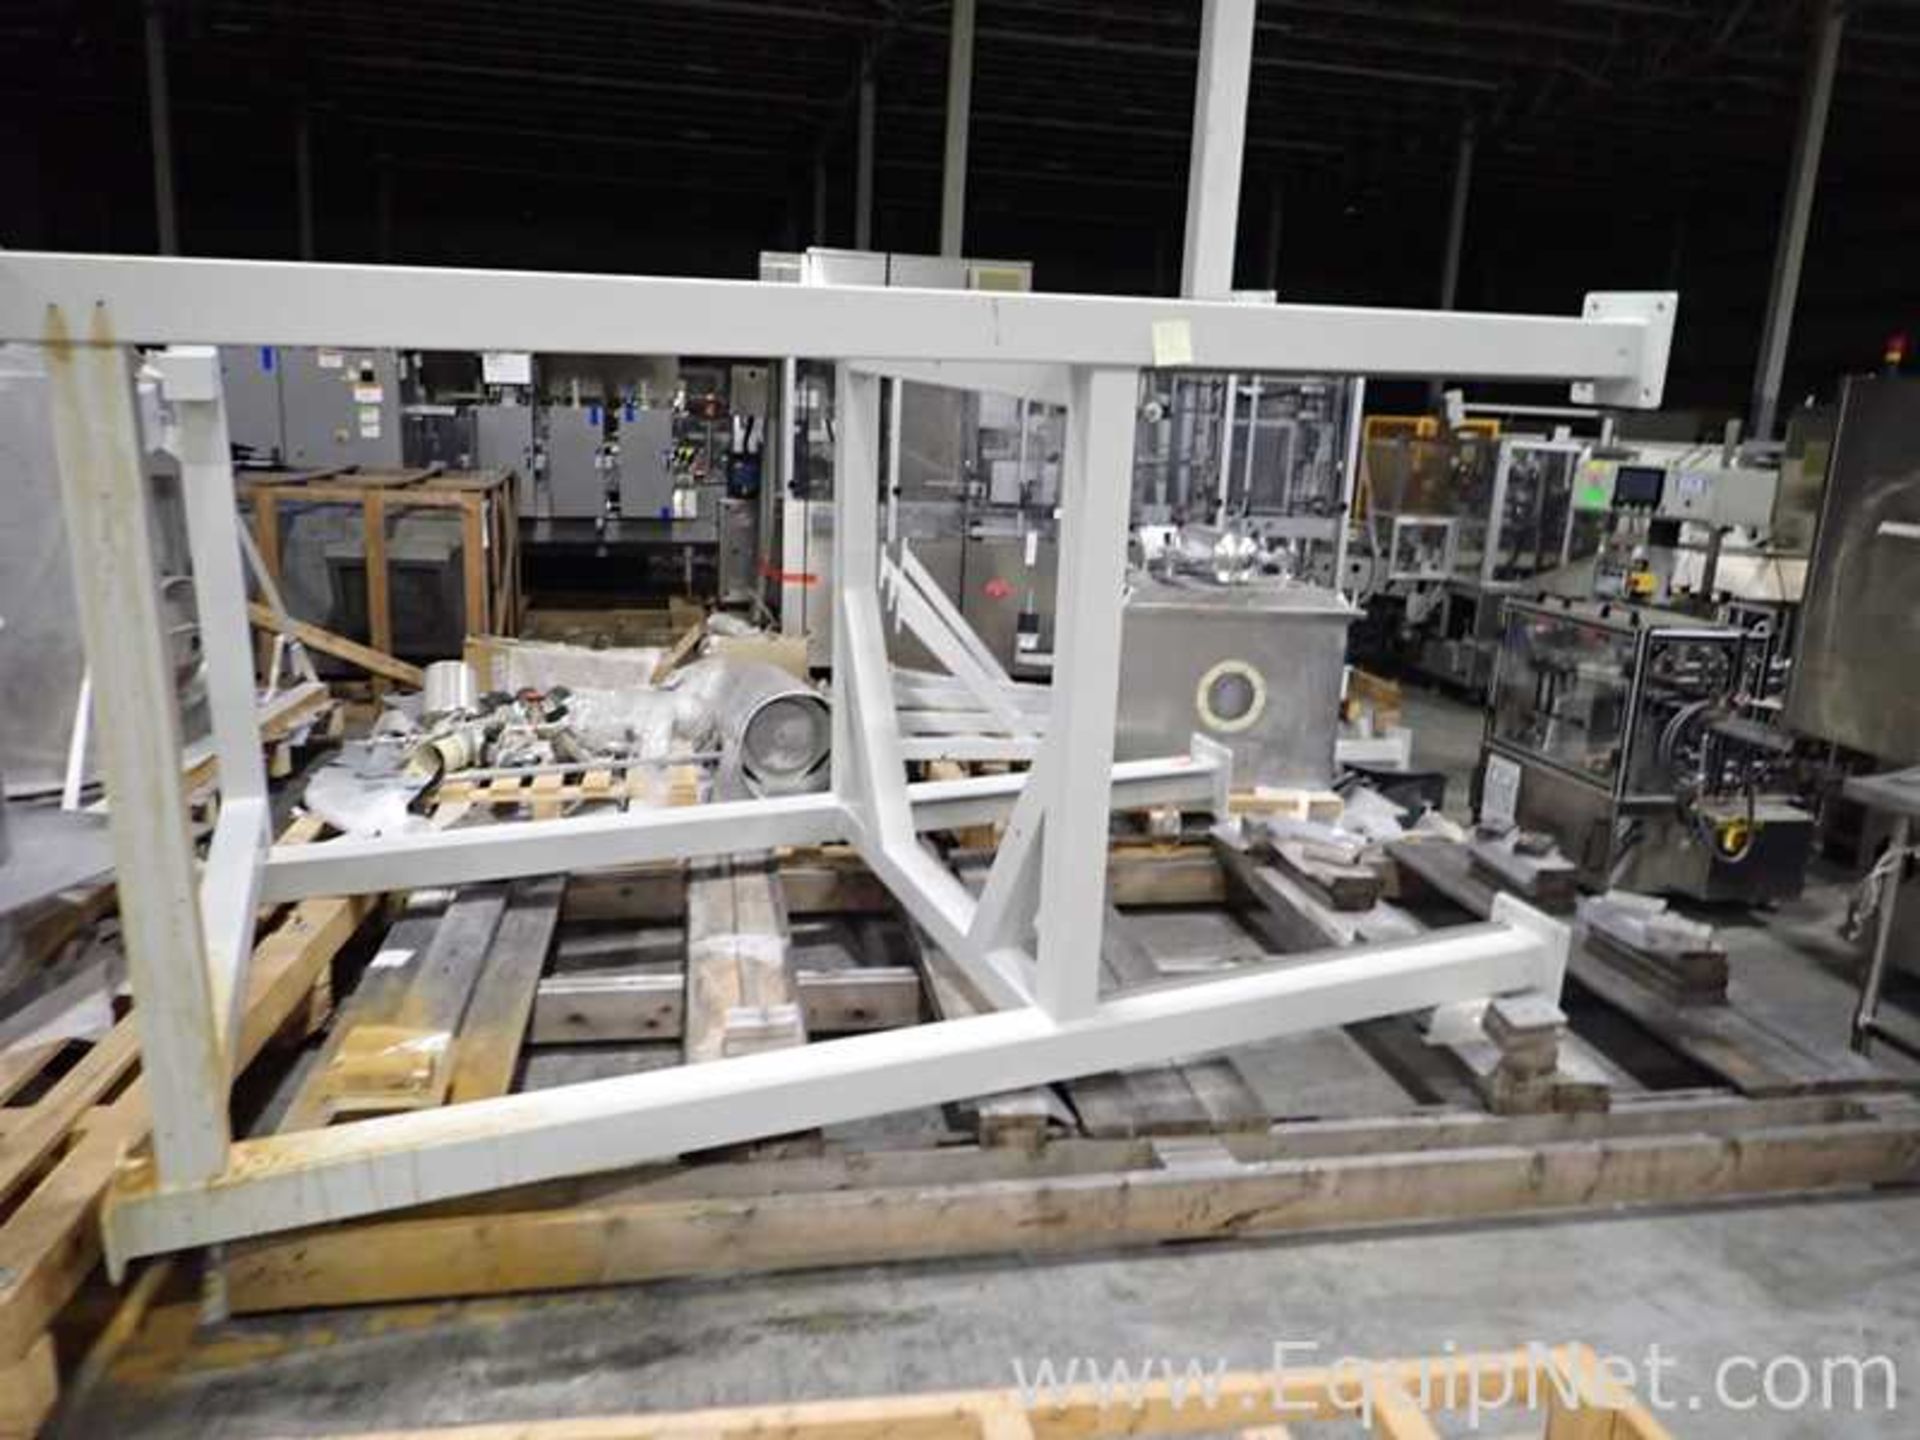 AZO Raw Material Production Equipment - Image 15 of 21